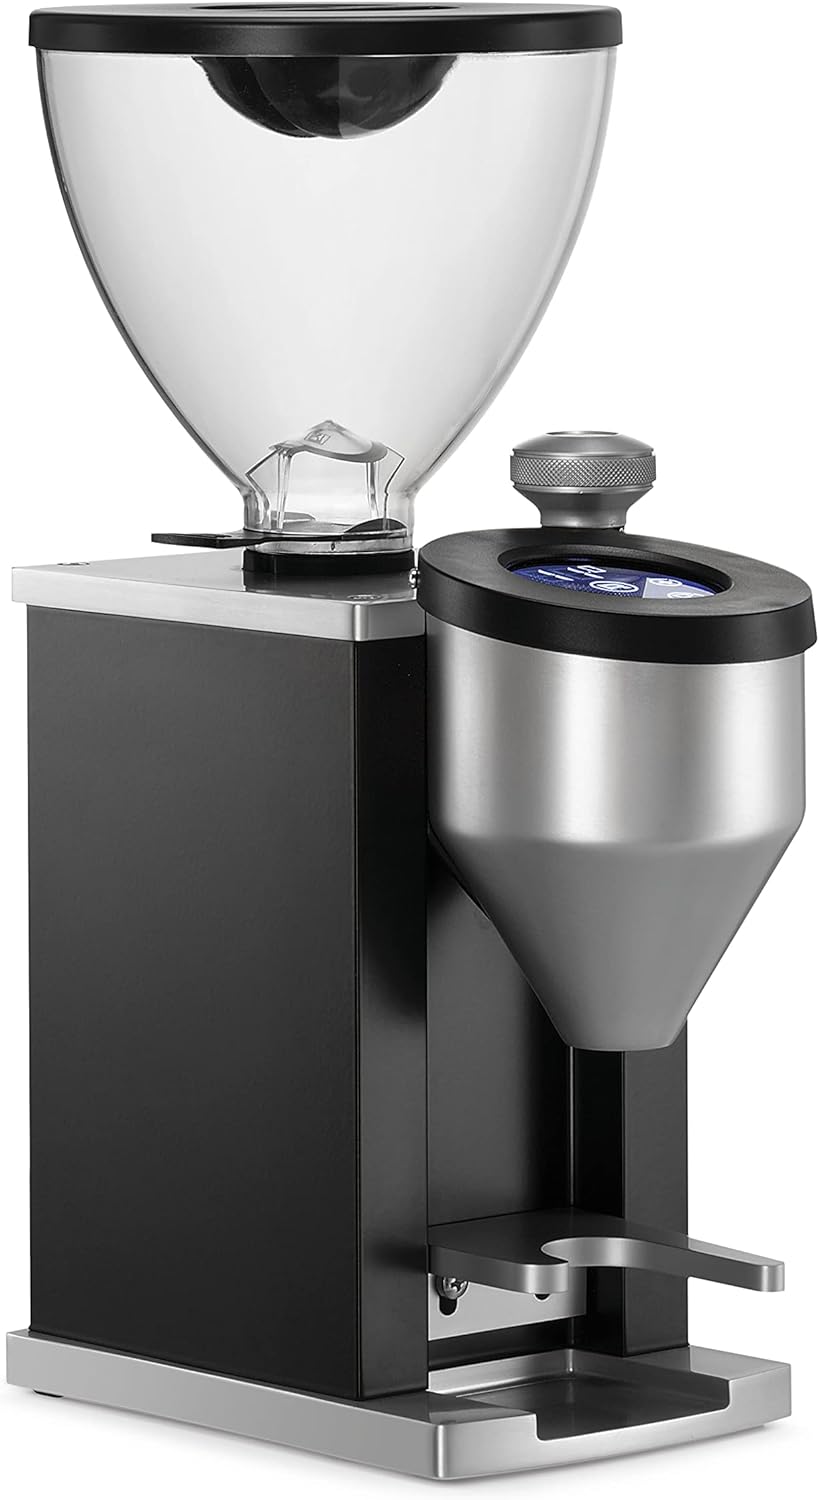 Rocket Faustino Coffee Grinder, Black, Compact Coffee Grinder With Elegant But Simple Design and High Quality